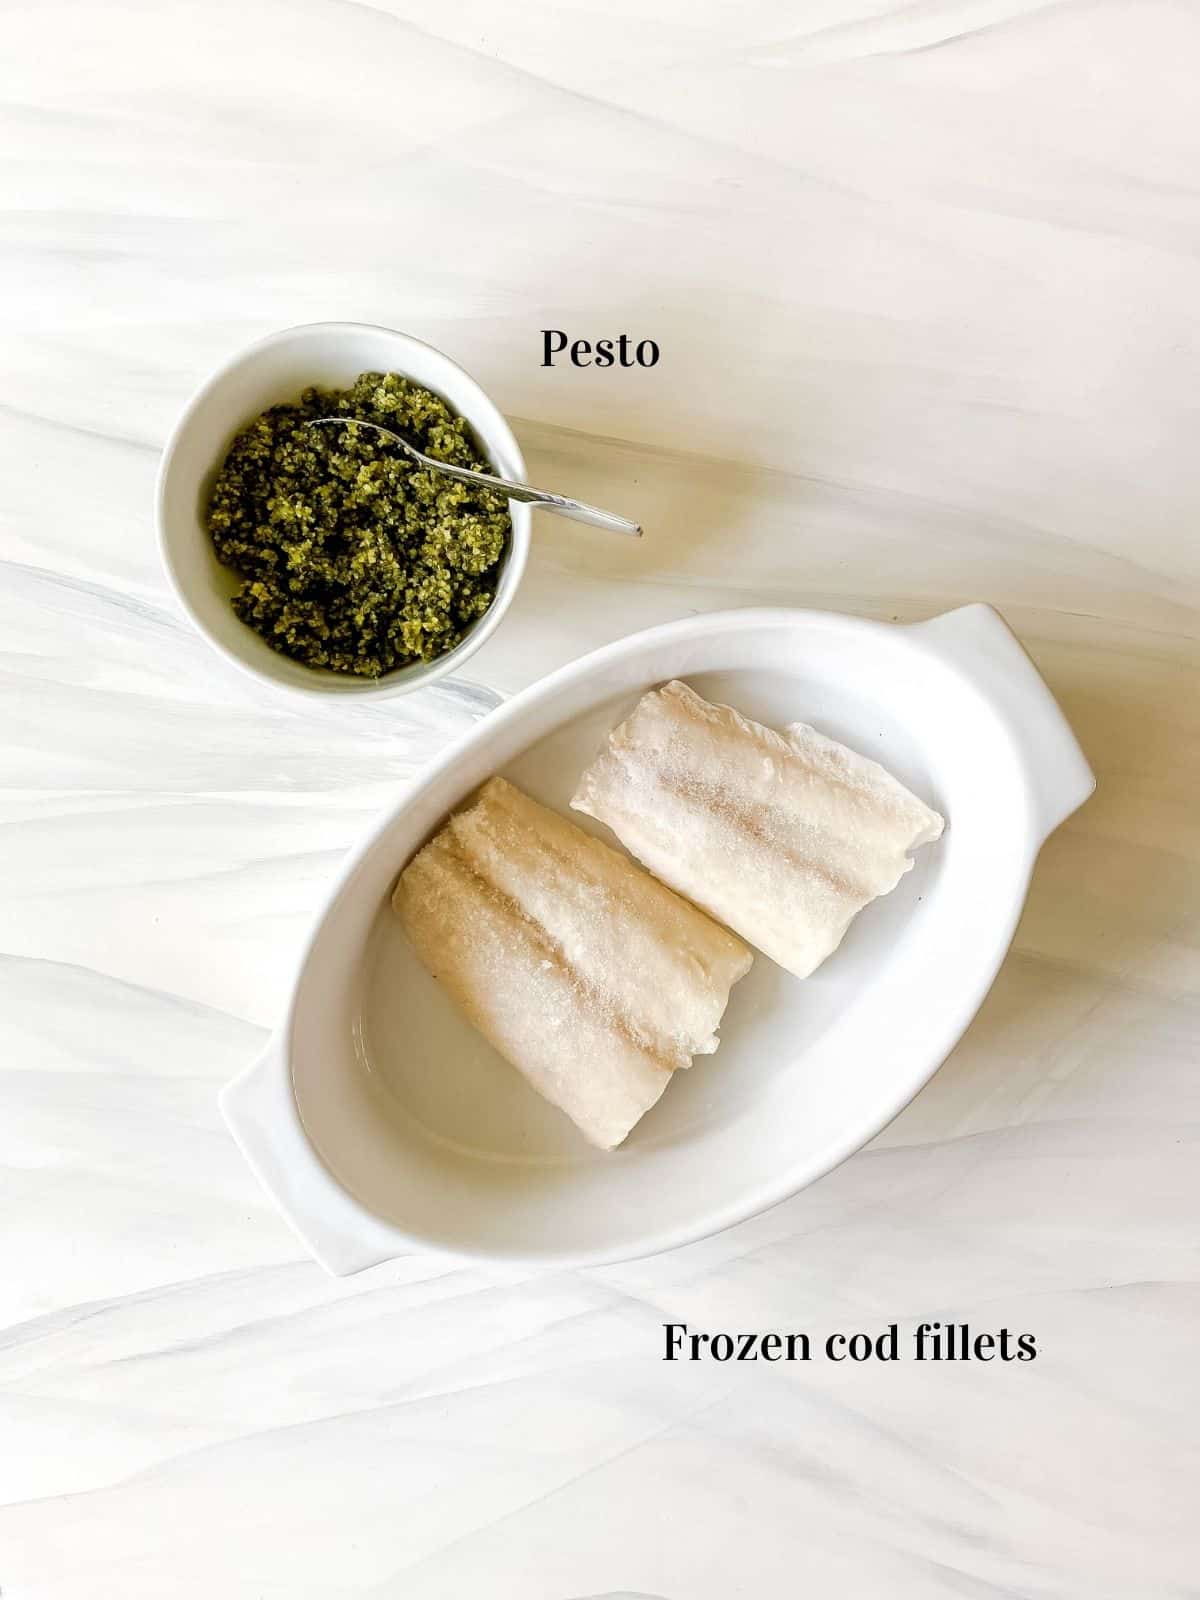 individually labelled two cod fillets in a white dish next to a white bowl of pesto.